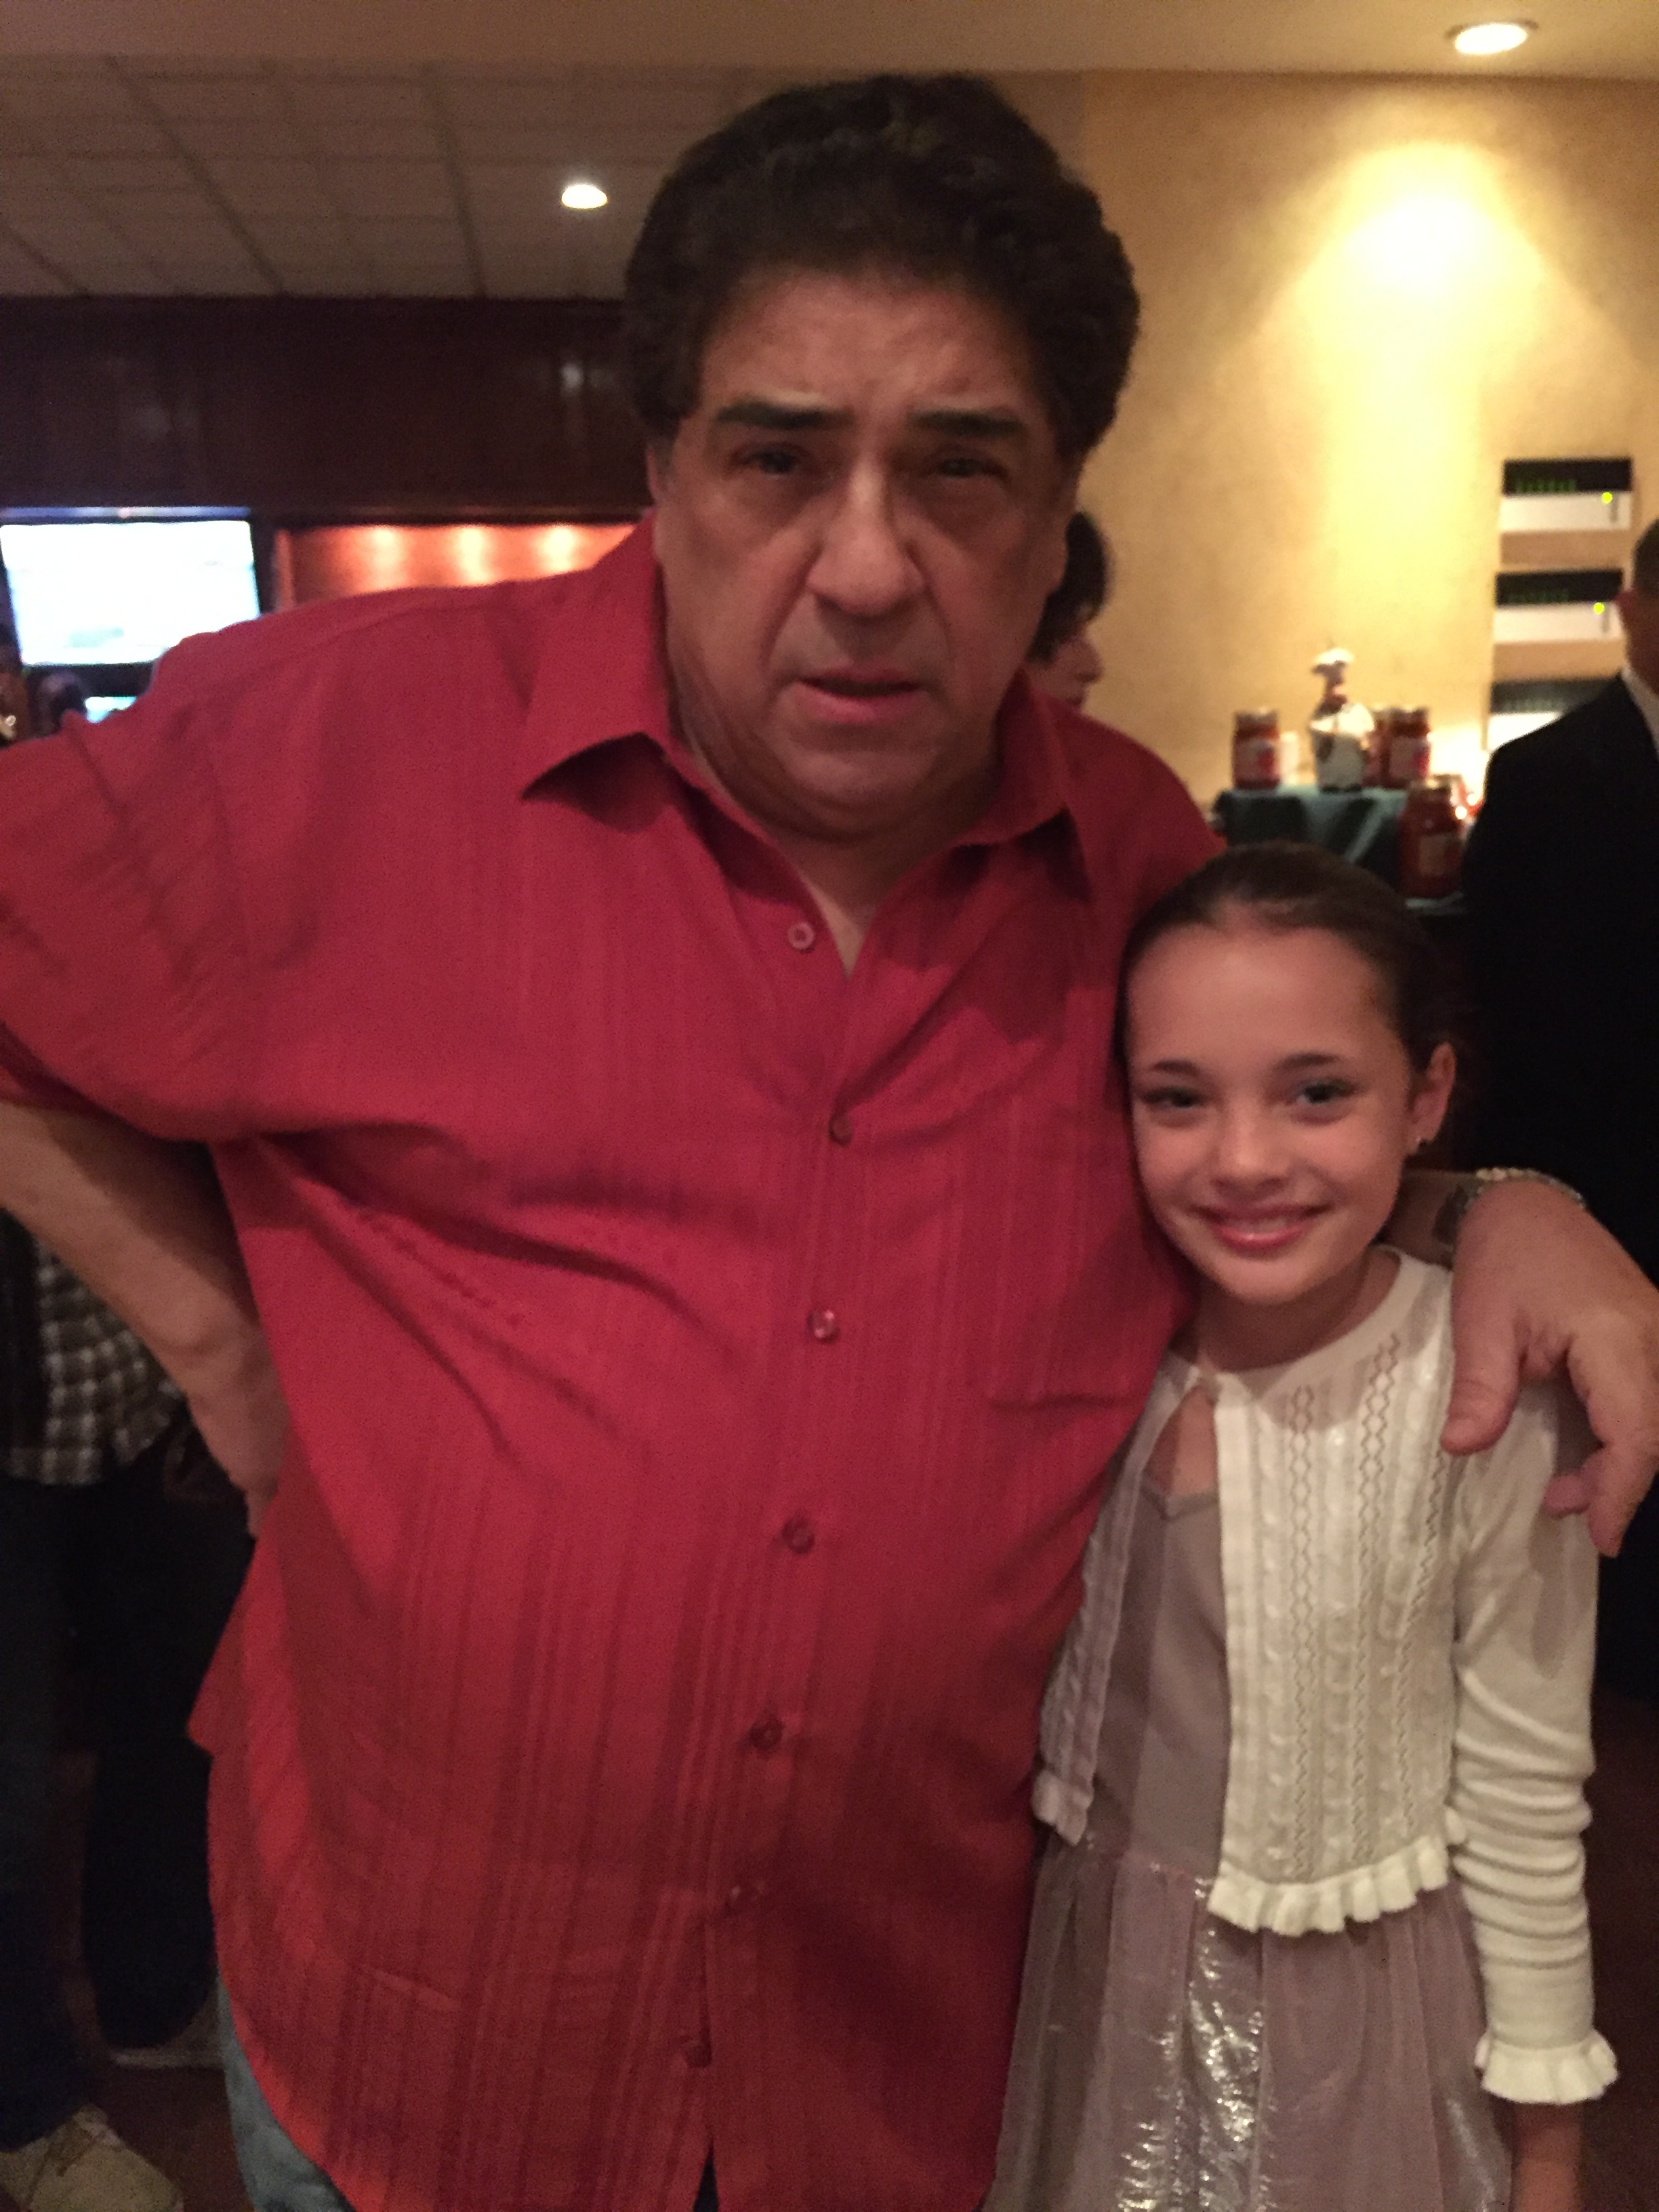 Actor Vincent Pastore of The Sopranos with actress Manda Madsen